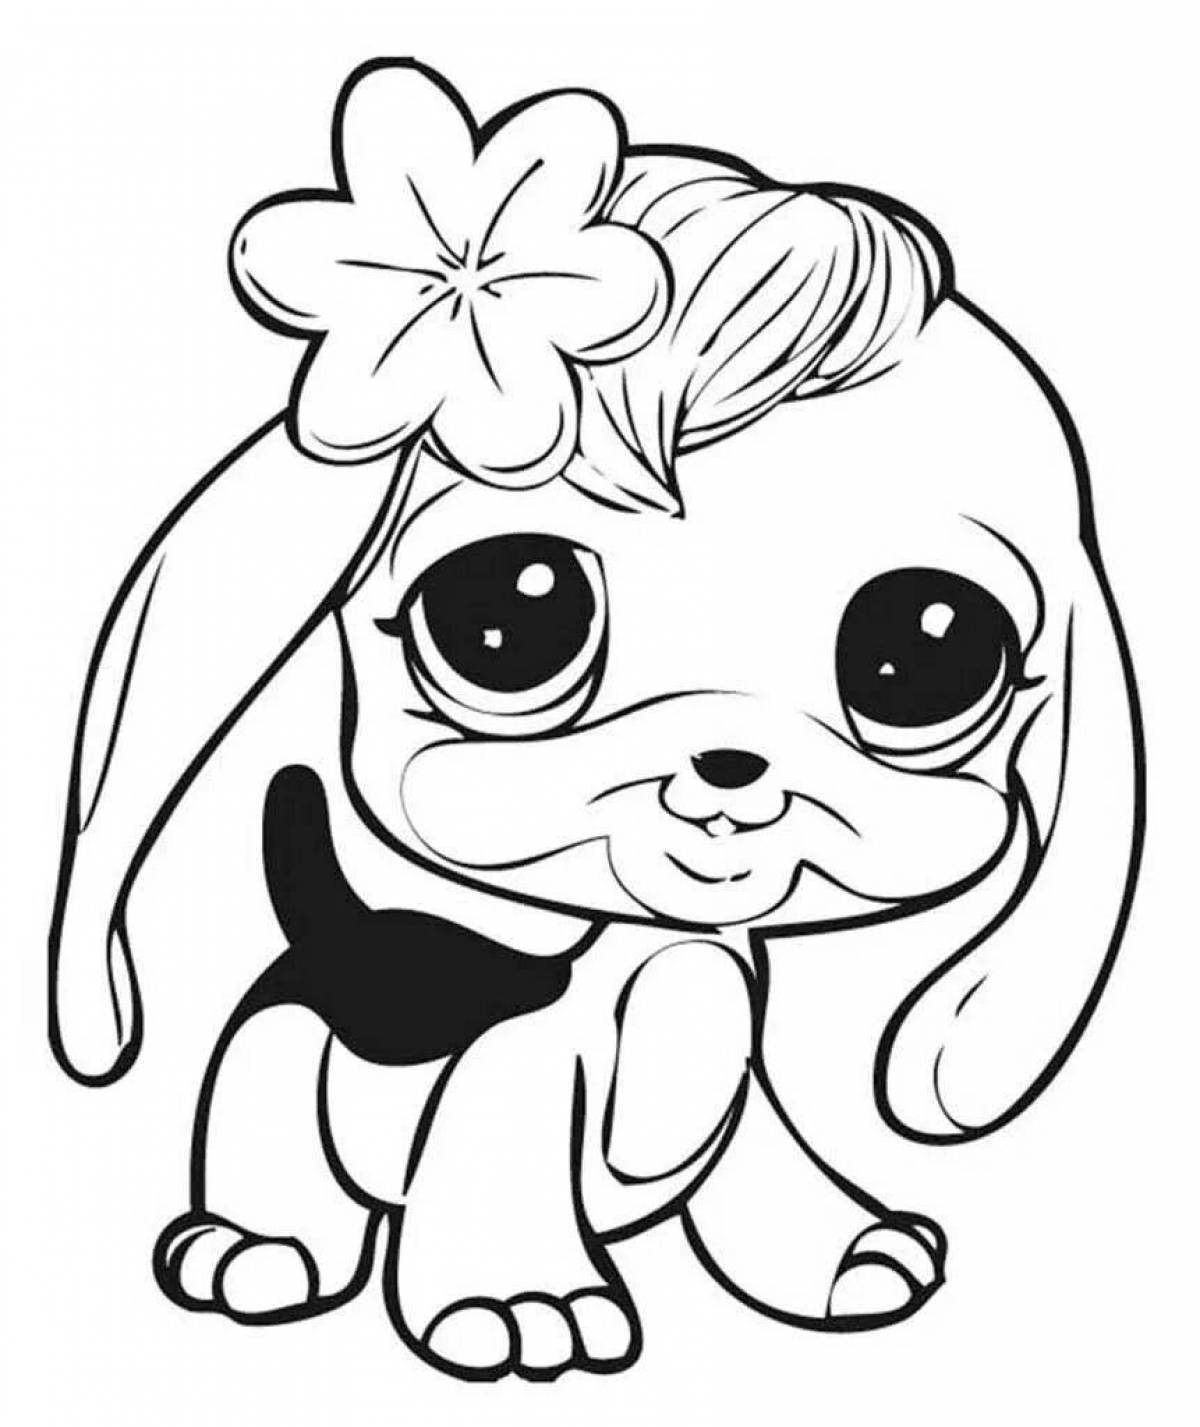 Coloring page playful cute puppy